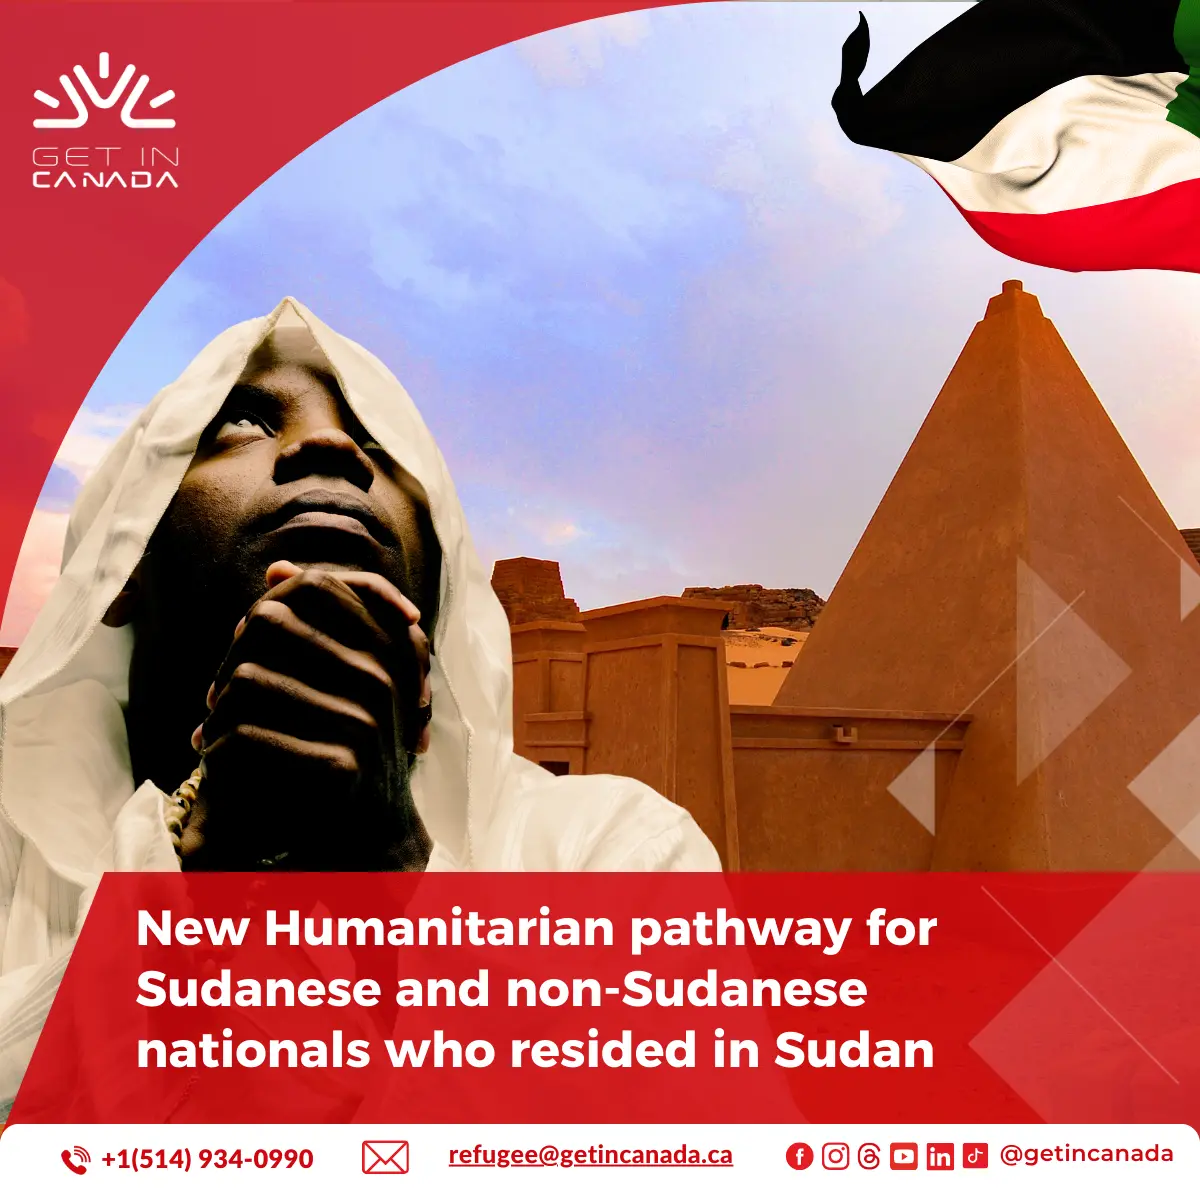 New Humanitarian pathway for Sudanese and non-Sudanese nationals who resided in Sudan,New Humanitarian pathway for Sudanese,New Humanitarian pathway for Sudanese and non-Sudanese nationals,Sudanese and non-Sudanese nationals who resided in Sudan,Sudanese and non-Sudanese nationals,Sudanese,Sudan,non-Sudanese nationals,non-Sudanese nationals who resided in Sudan